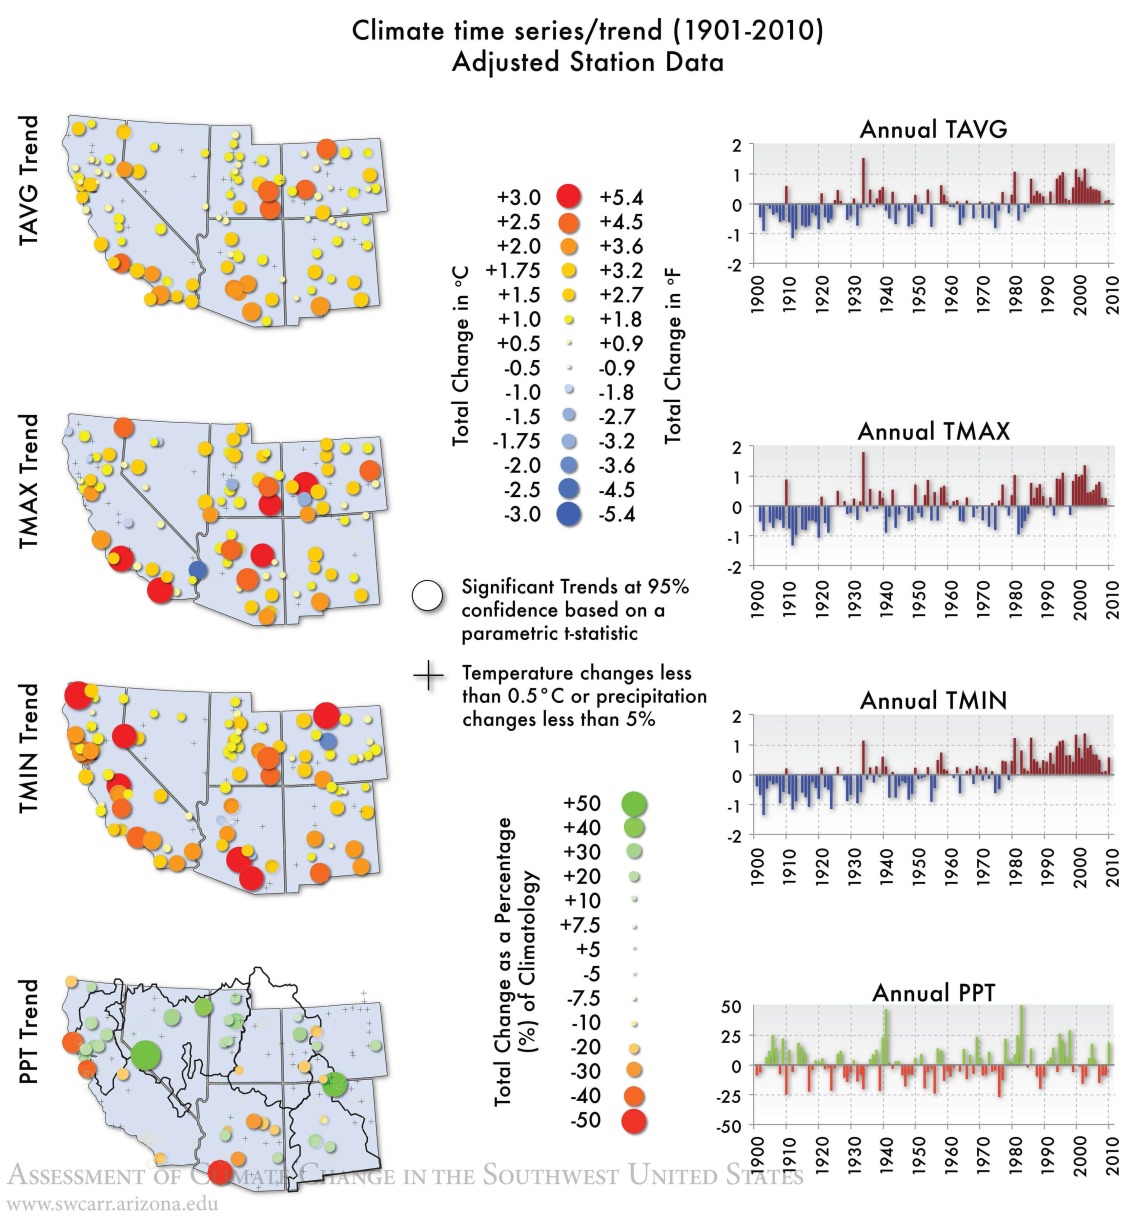 Figure 1 from Chapter 5 of Climate Assessment Report.